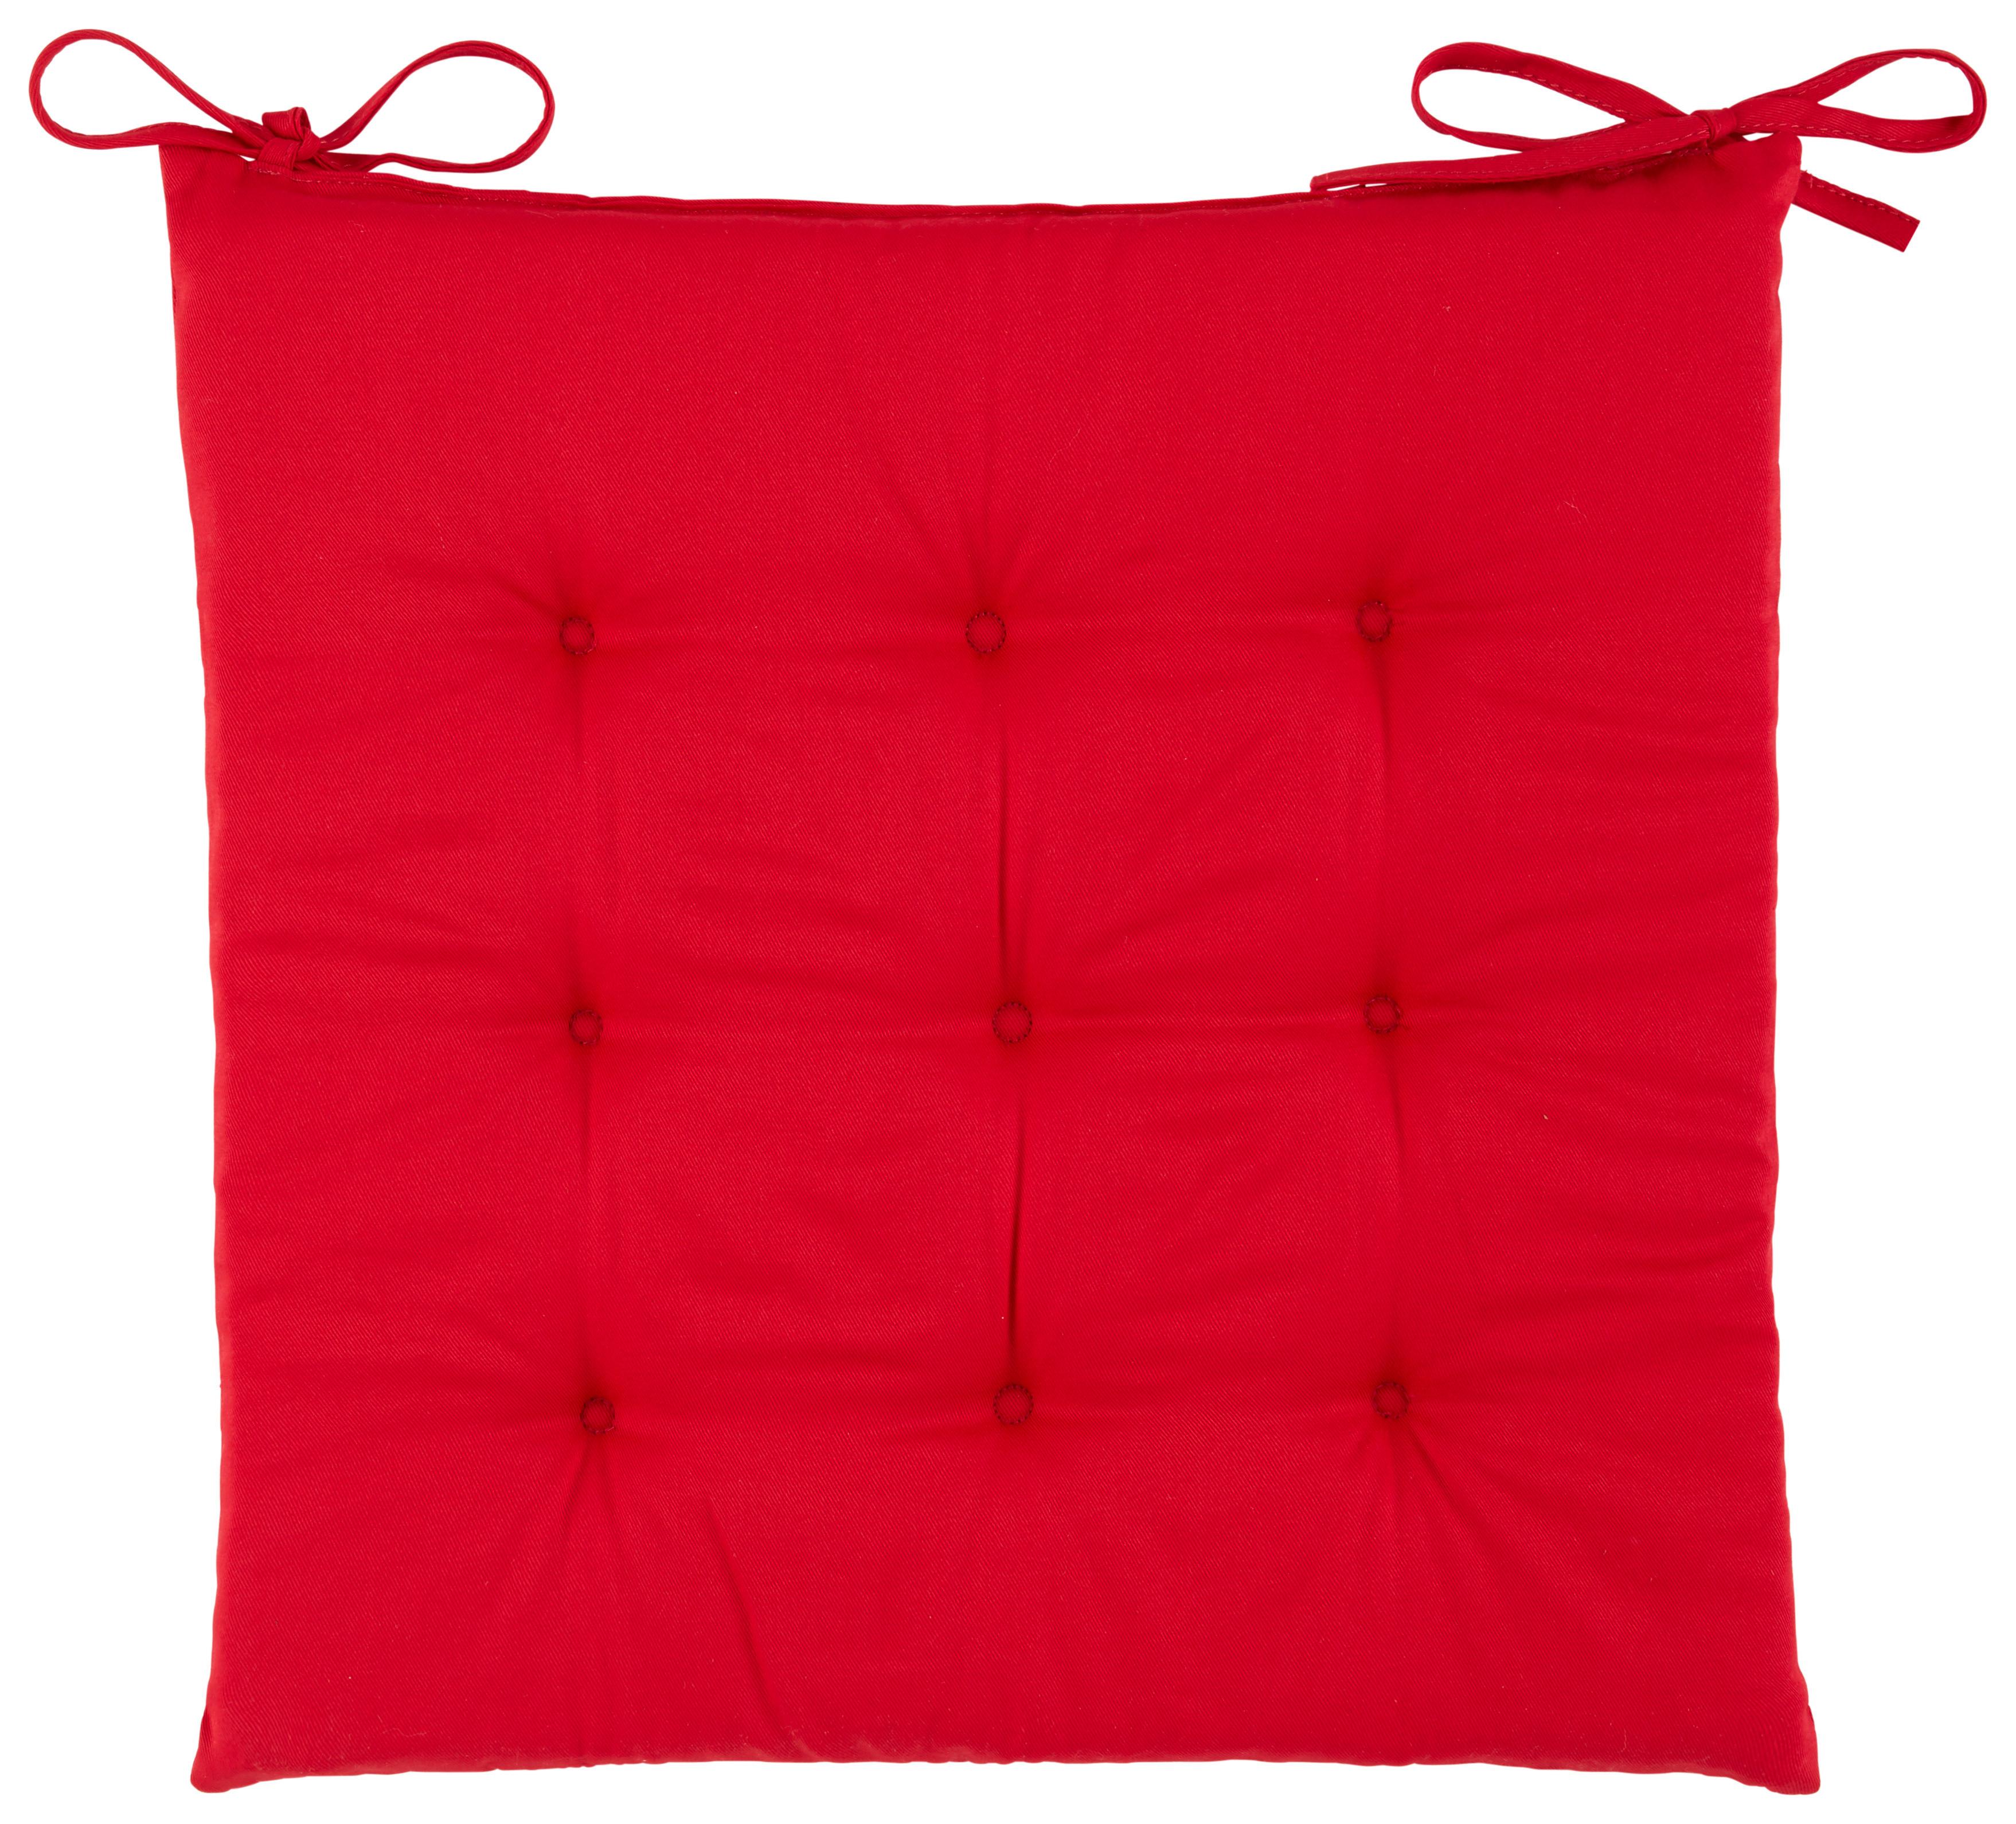 Sitzkissen Lola in Rot ca. 40x40cm - Rot, Konventionell (40/40/4cm) - Based